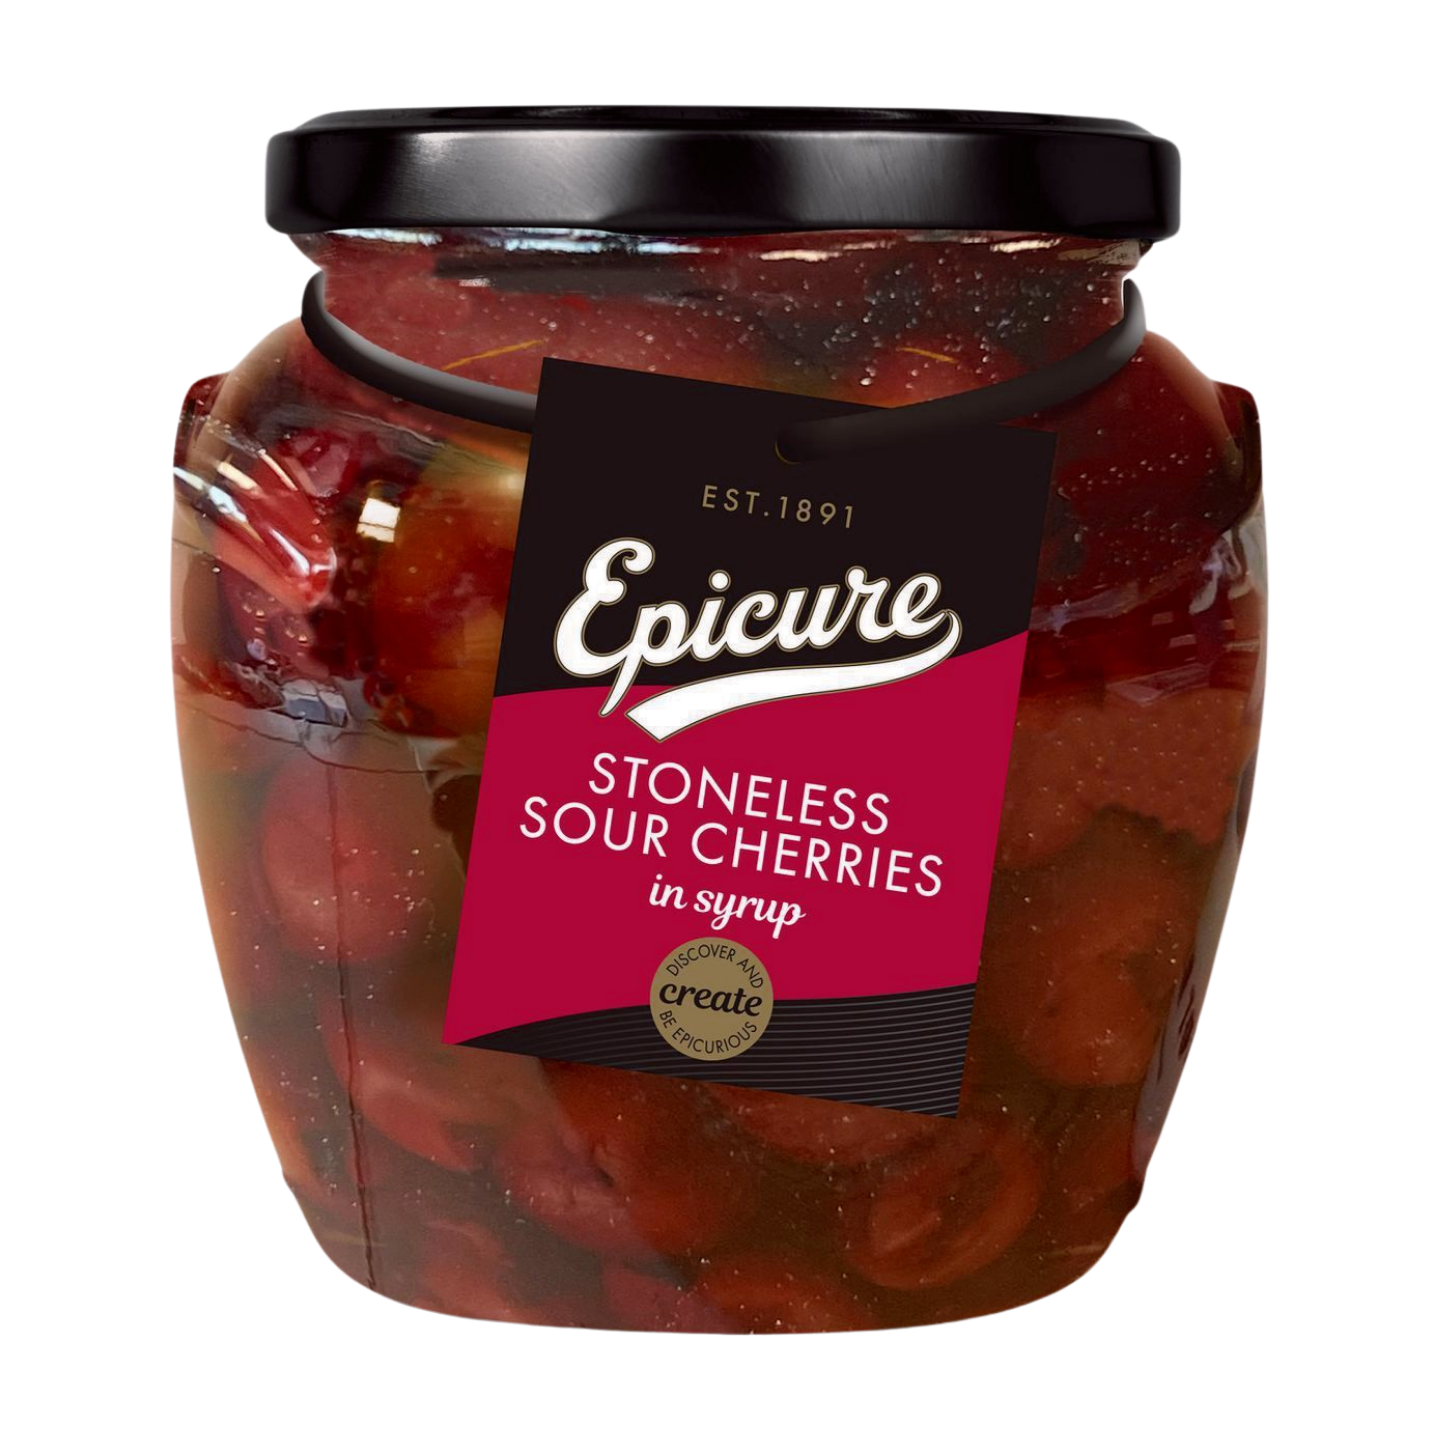 Epicure Stoneless Sour Cherries in Light Syrup (570g)